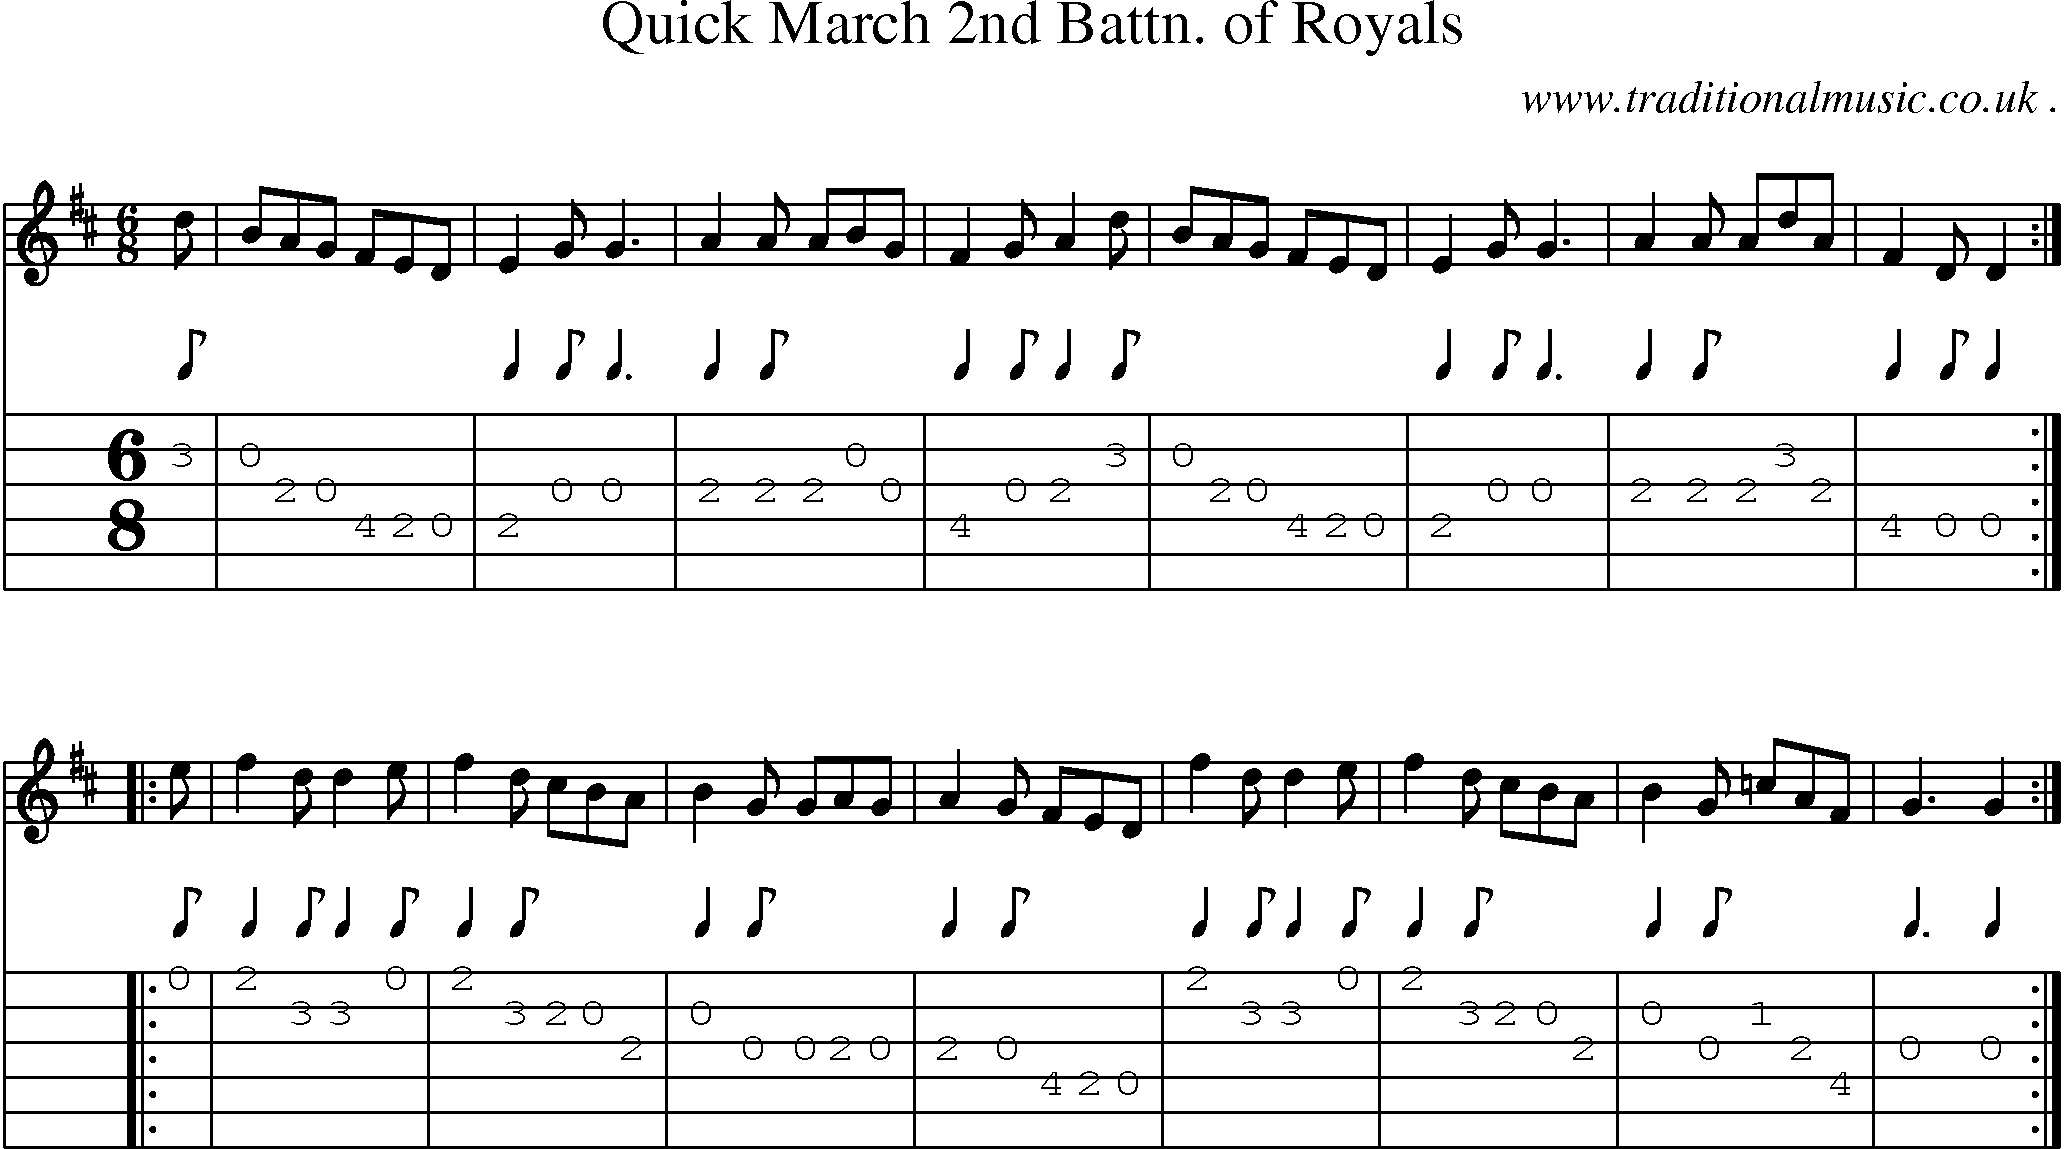 Sheet-music  score, Chords and Guitar Tabs for Quick March 2nd Battn Of Royals